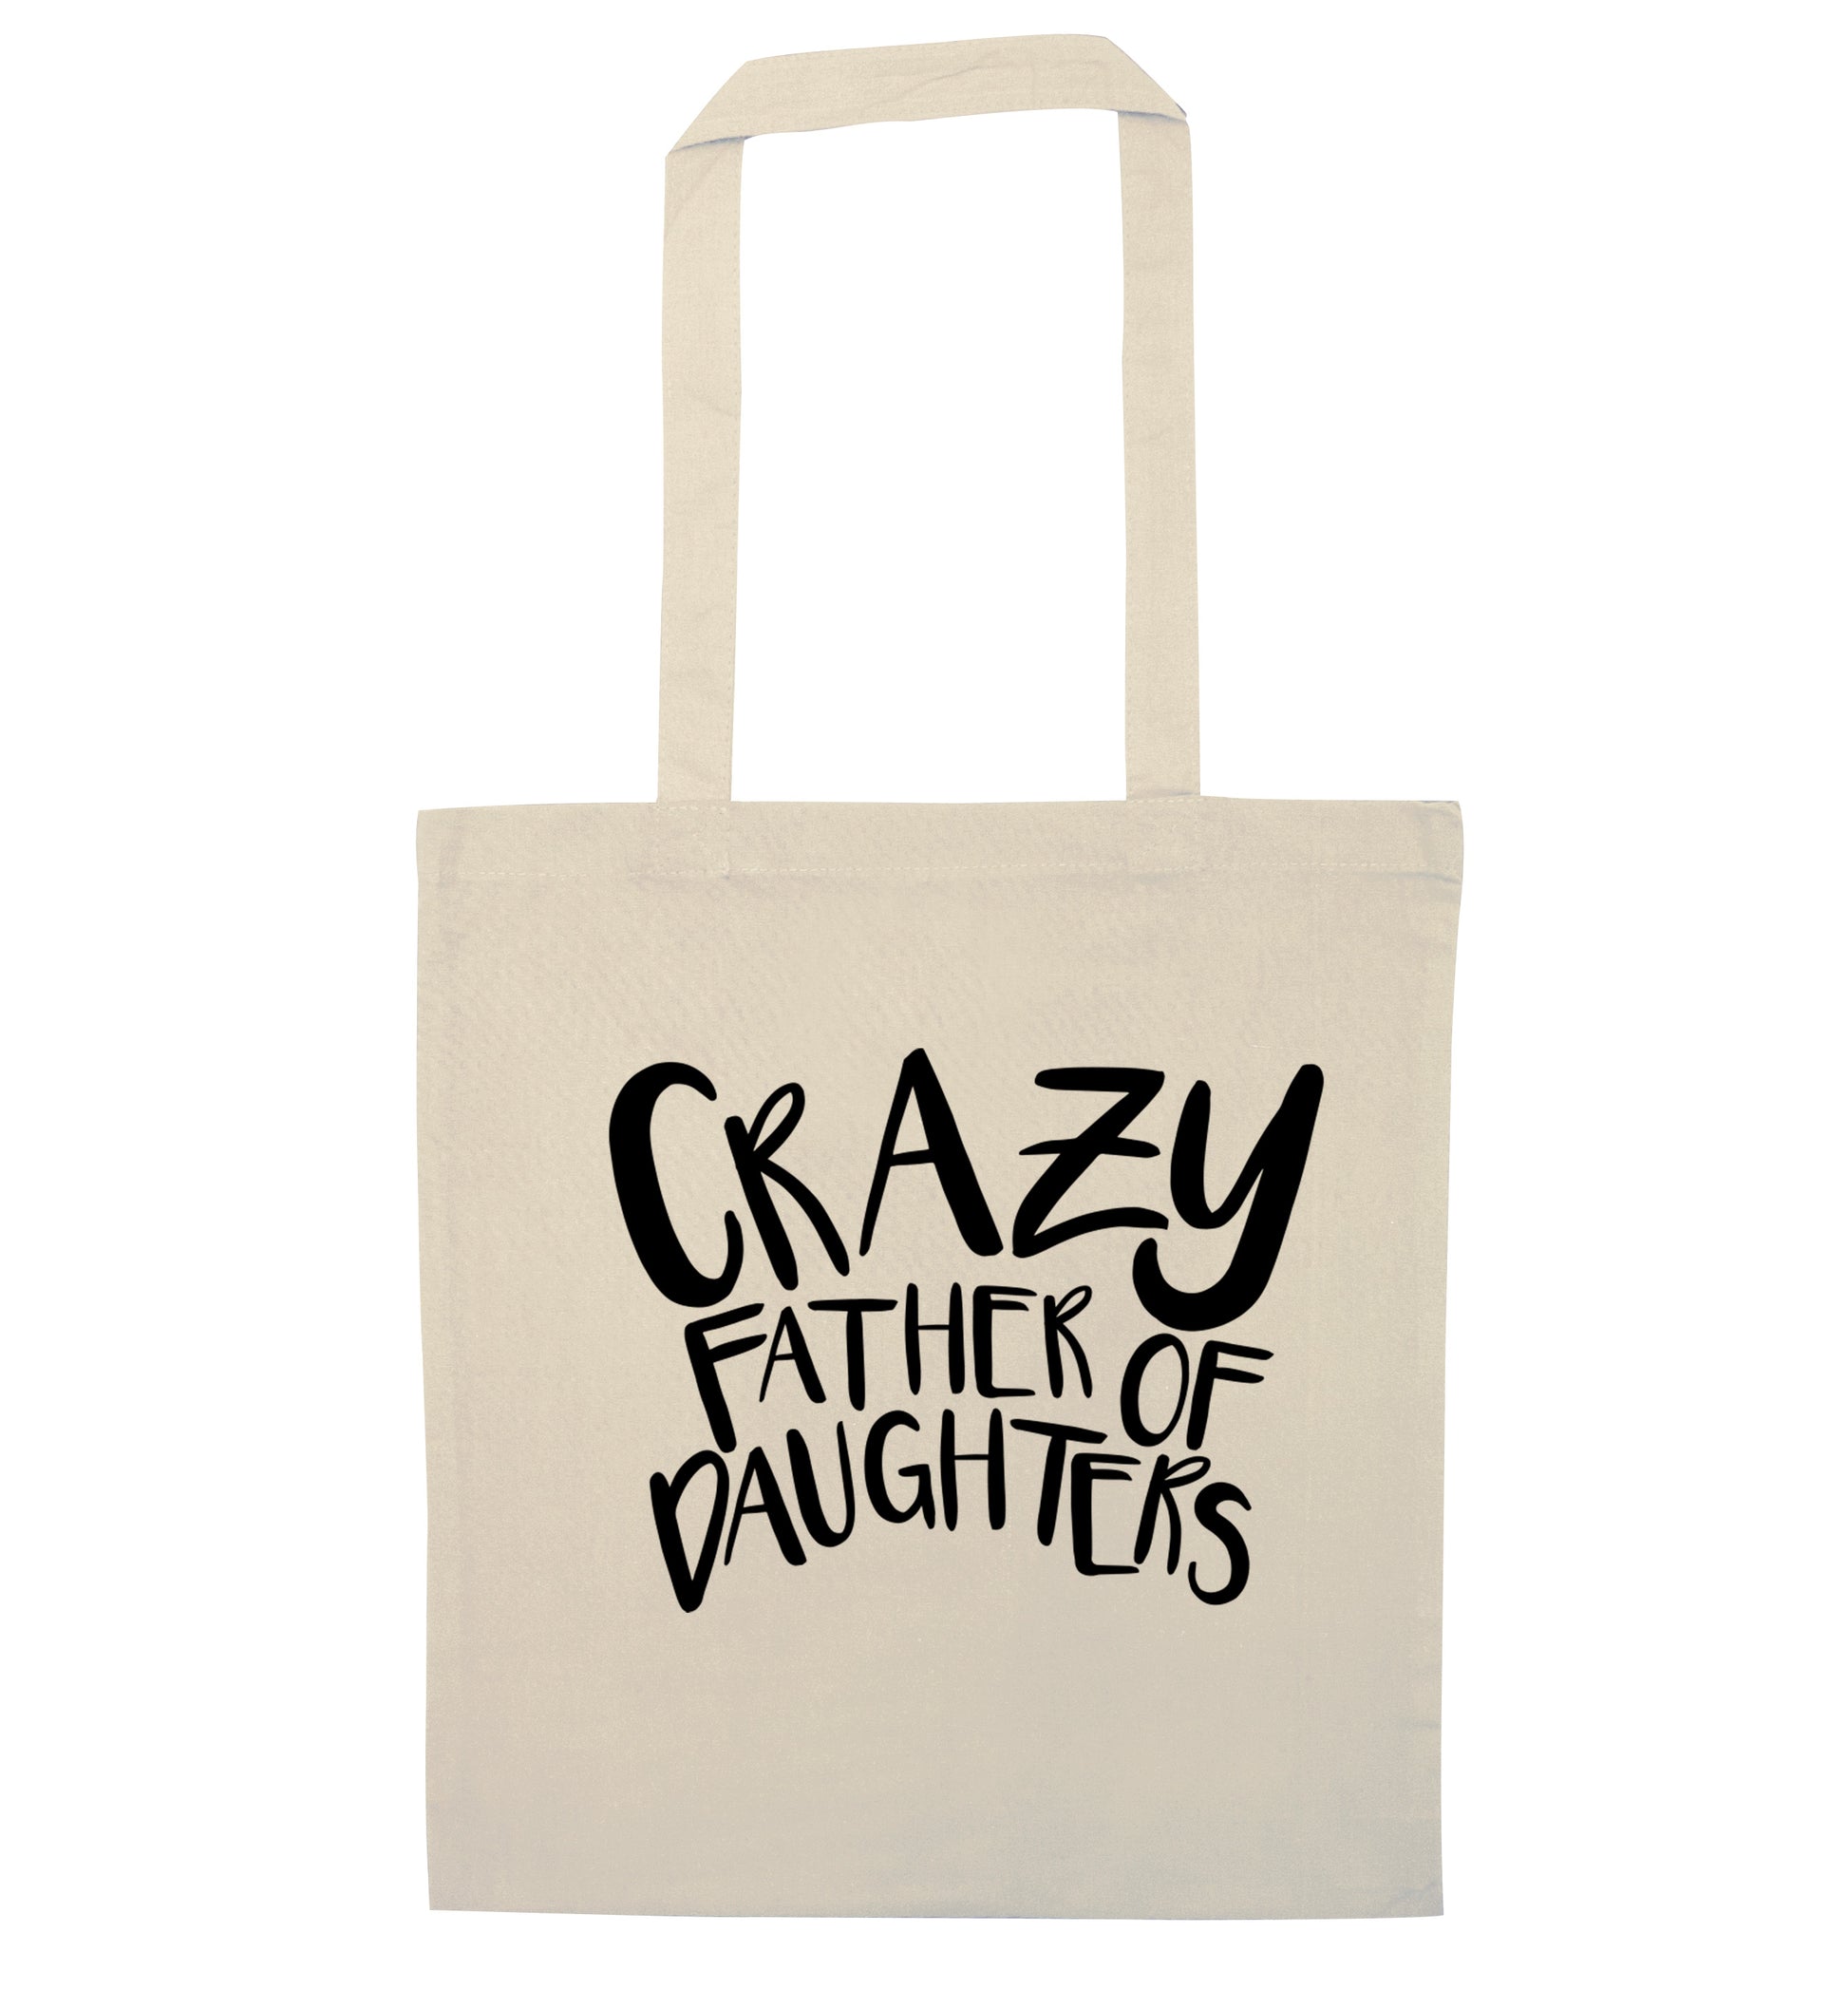 Crazy father of daughters natural tote bag